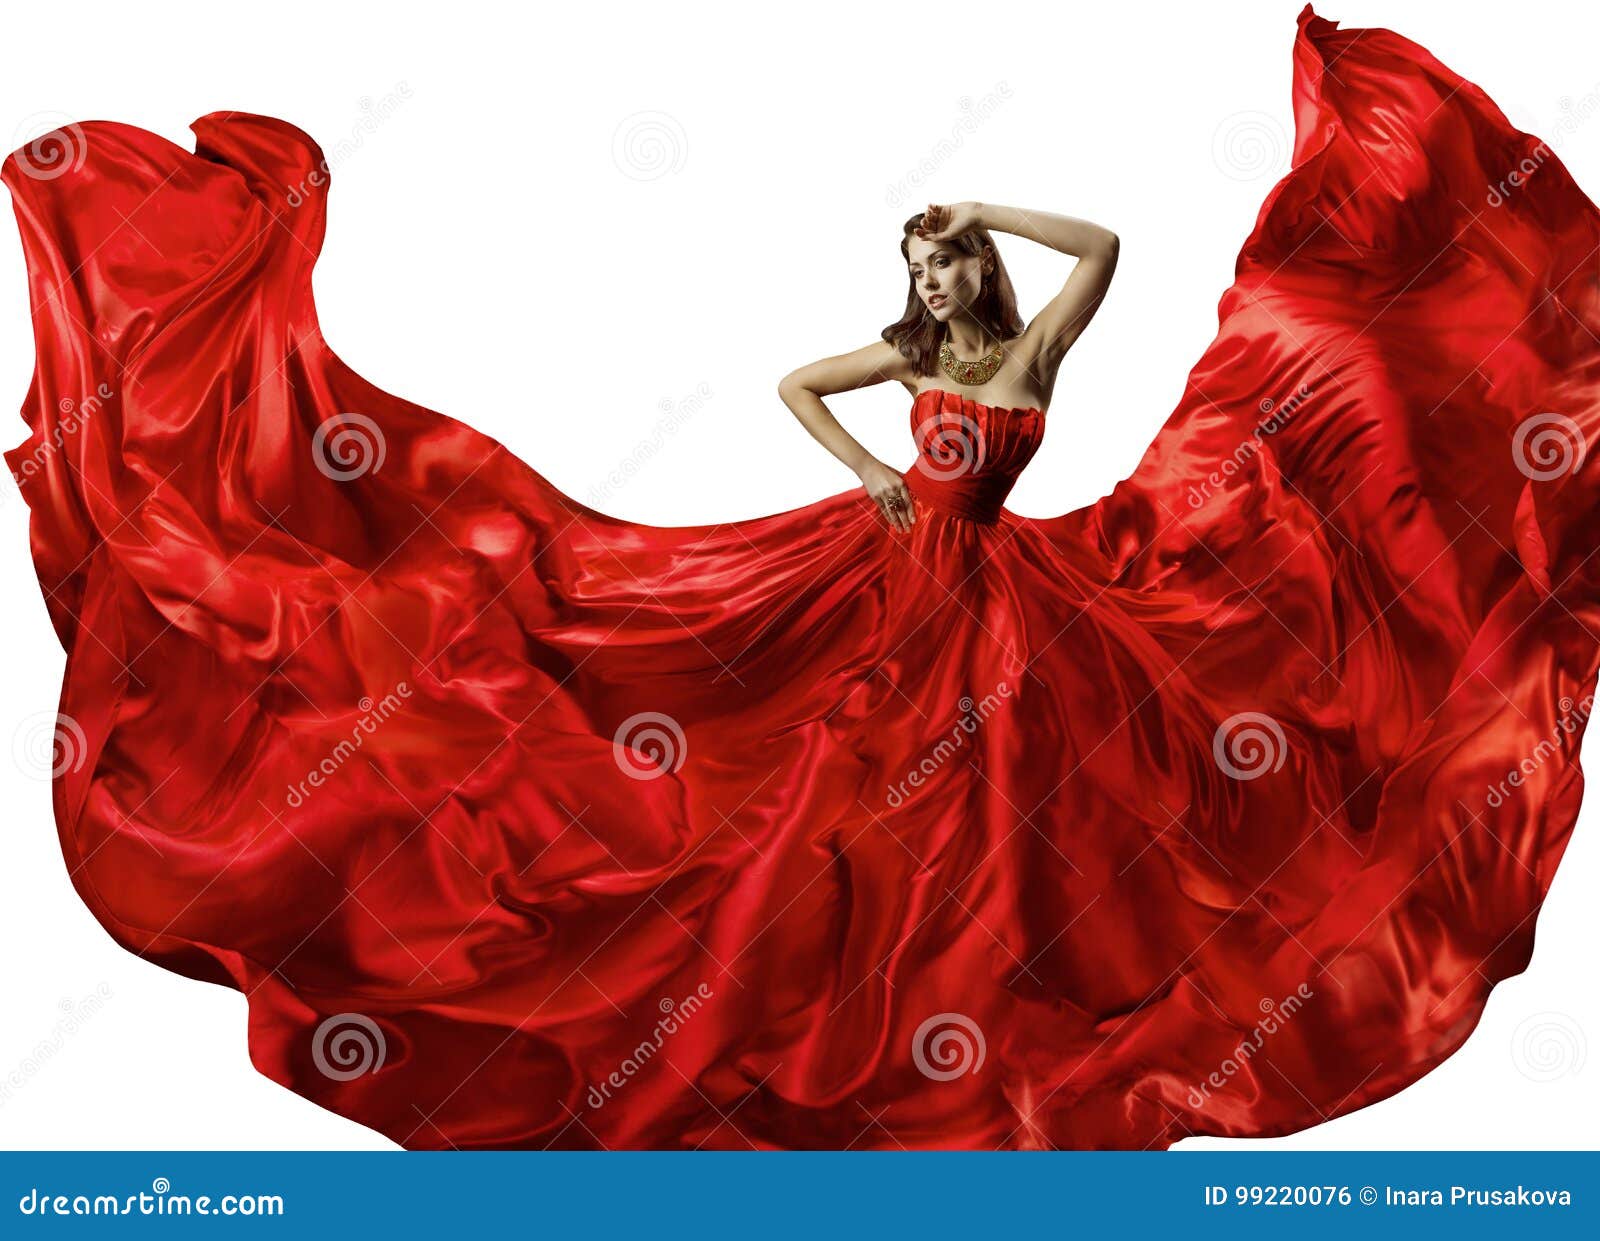 13 466 Ball Gown Photos Free Royalty Free Stock Photos From Dreamstime